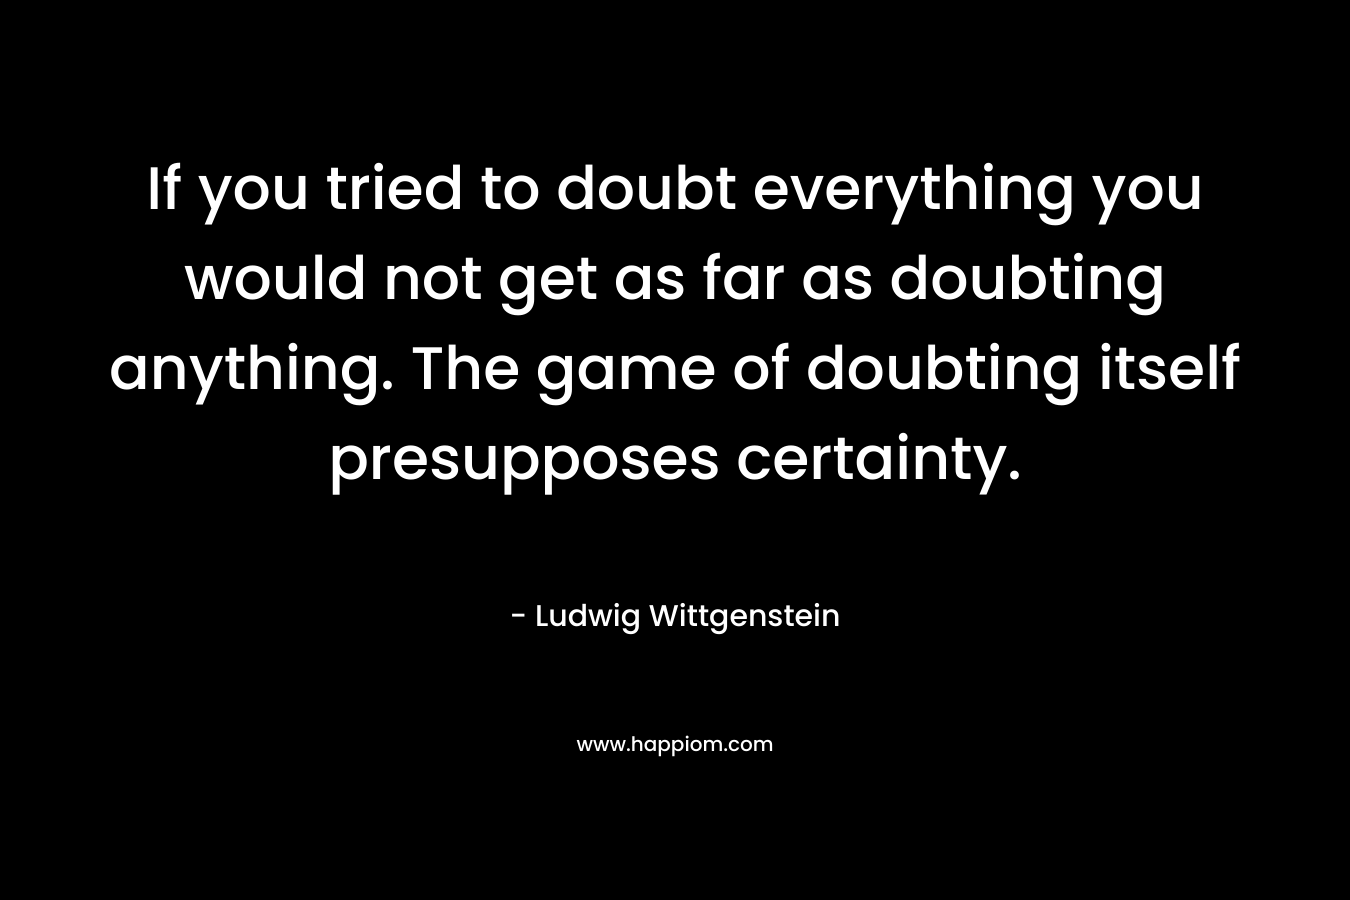 If you tried to doubt everything you would not get as far as doubting anything. The game of doubting itself presupposes certainty. – Ludwig Wittgenstein